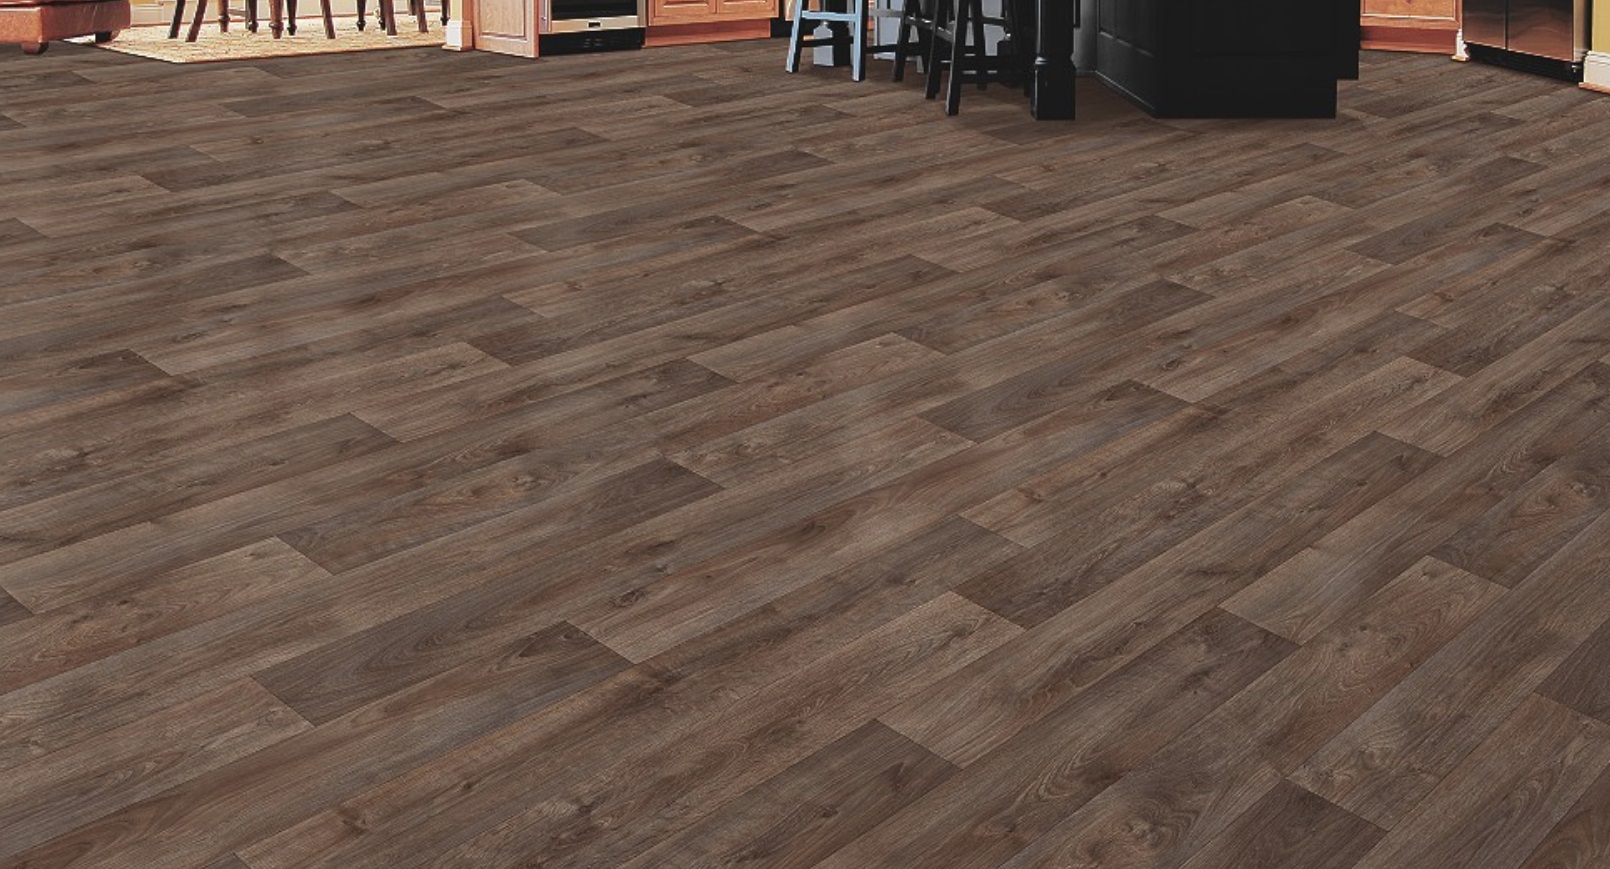 One of the standout features of sheet vinyl is its ability to mimic the look of various flooring materials, including hardwood, tile, and stone. This design versatility makes it a practical choice for those seeking the aesthetic appeal of natural materials without the associated costs and maintenance.